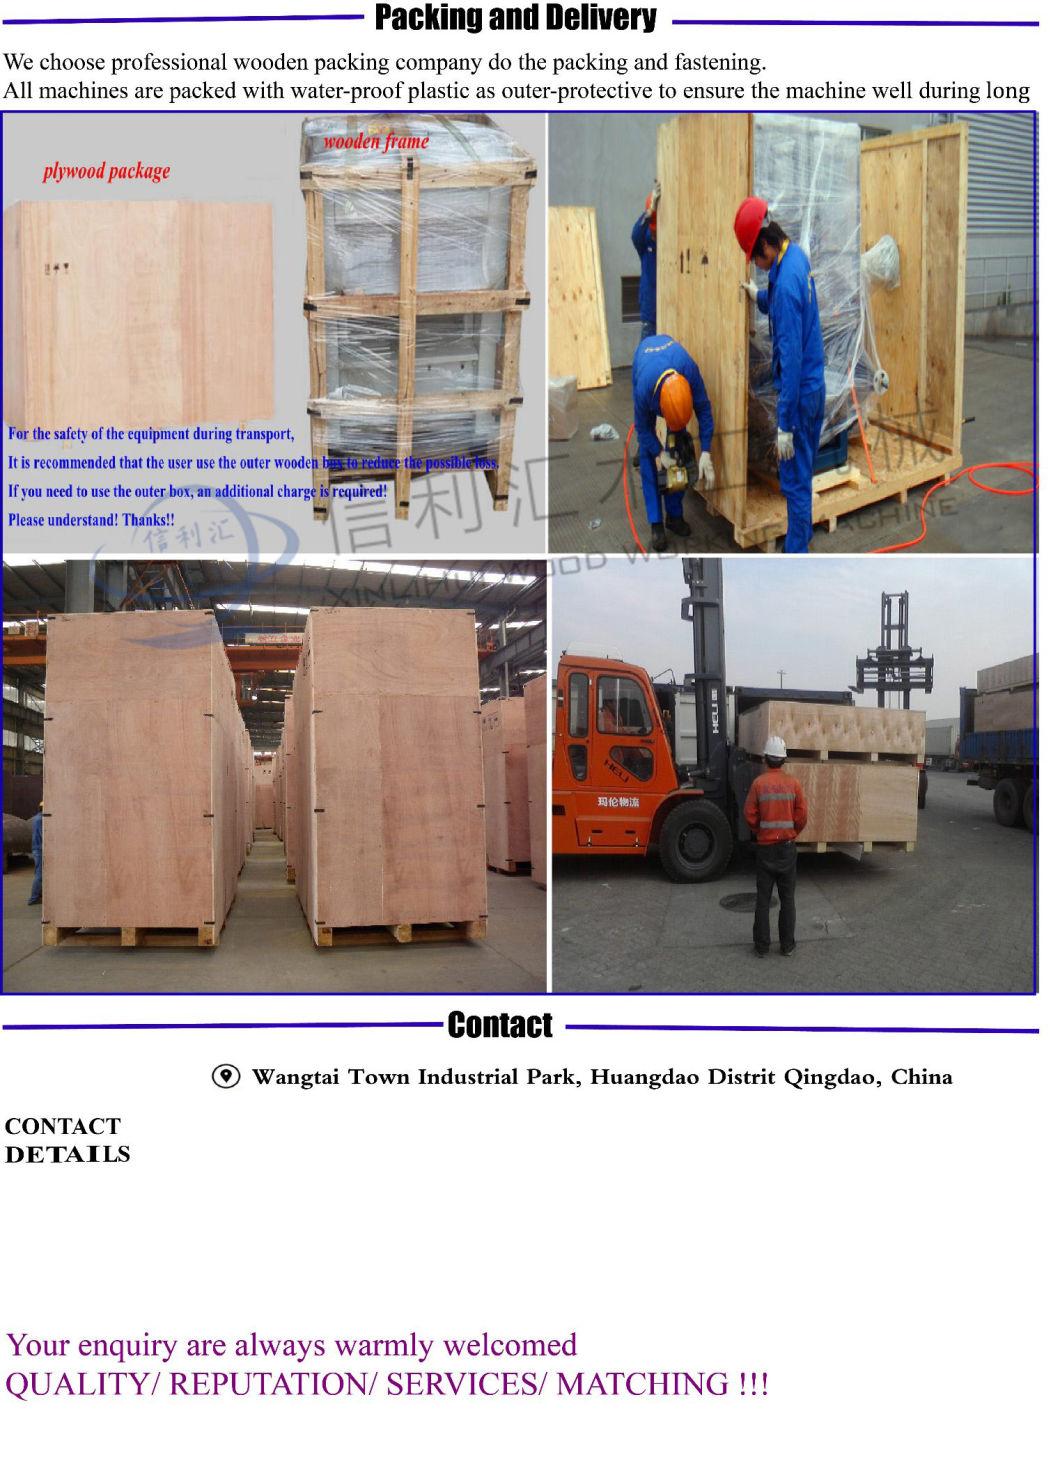 Wooden Frame Wooden Stair Laminating Woodworking Machine/ Butt Joint Machine with Hydraulic Press/ Edge Glued Panels Jointing Machine China Manufacture